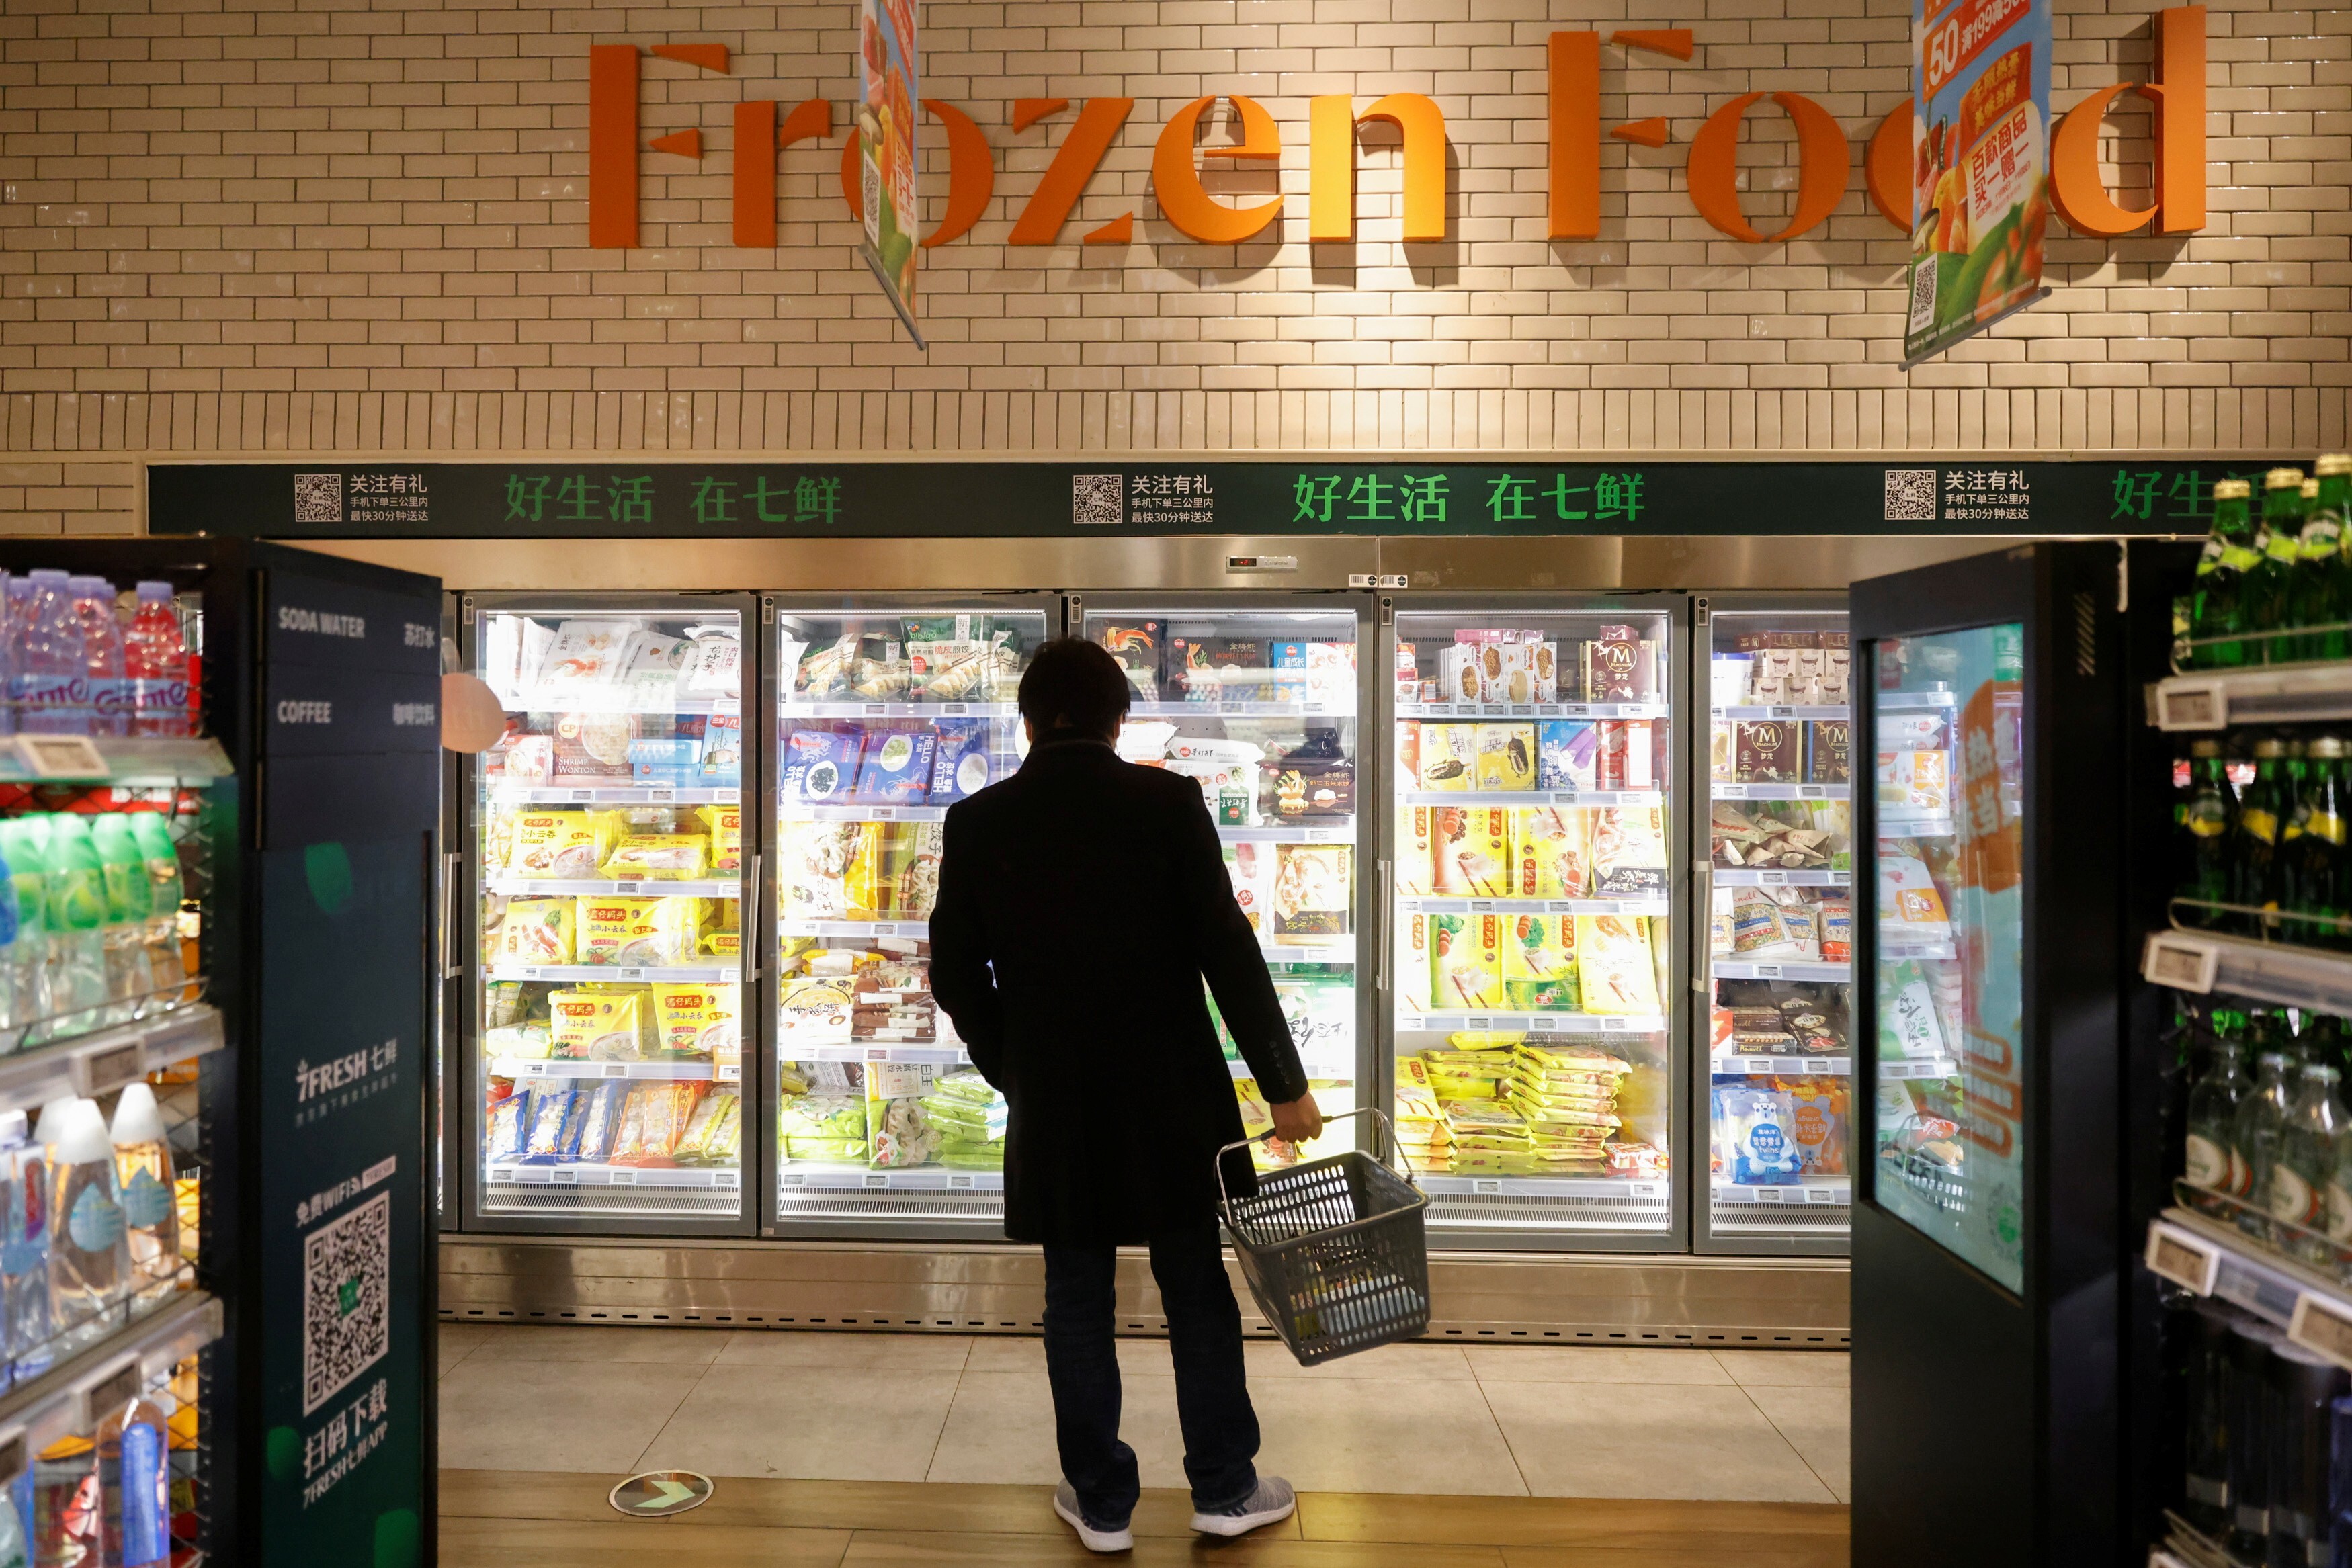 Coronavirus testing and disinfecting procedures in China have slowed down distribution of frozen food imports and dampened consumer interest. Photo: Reuters